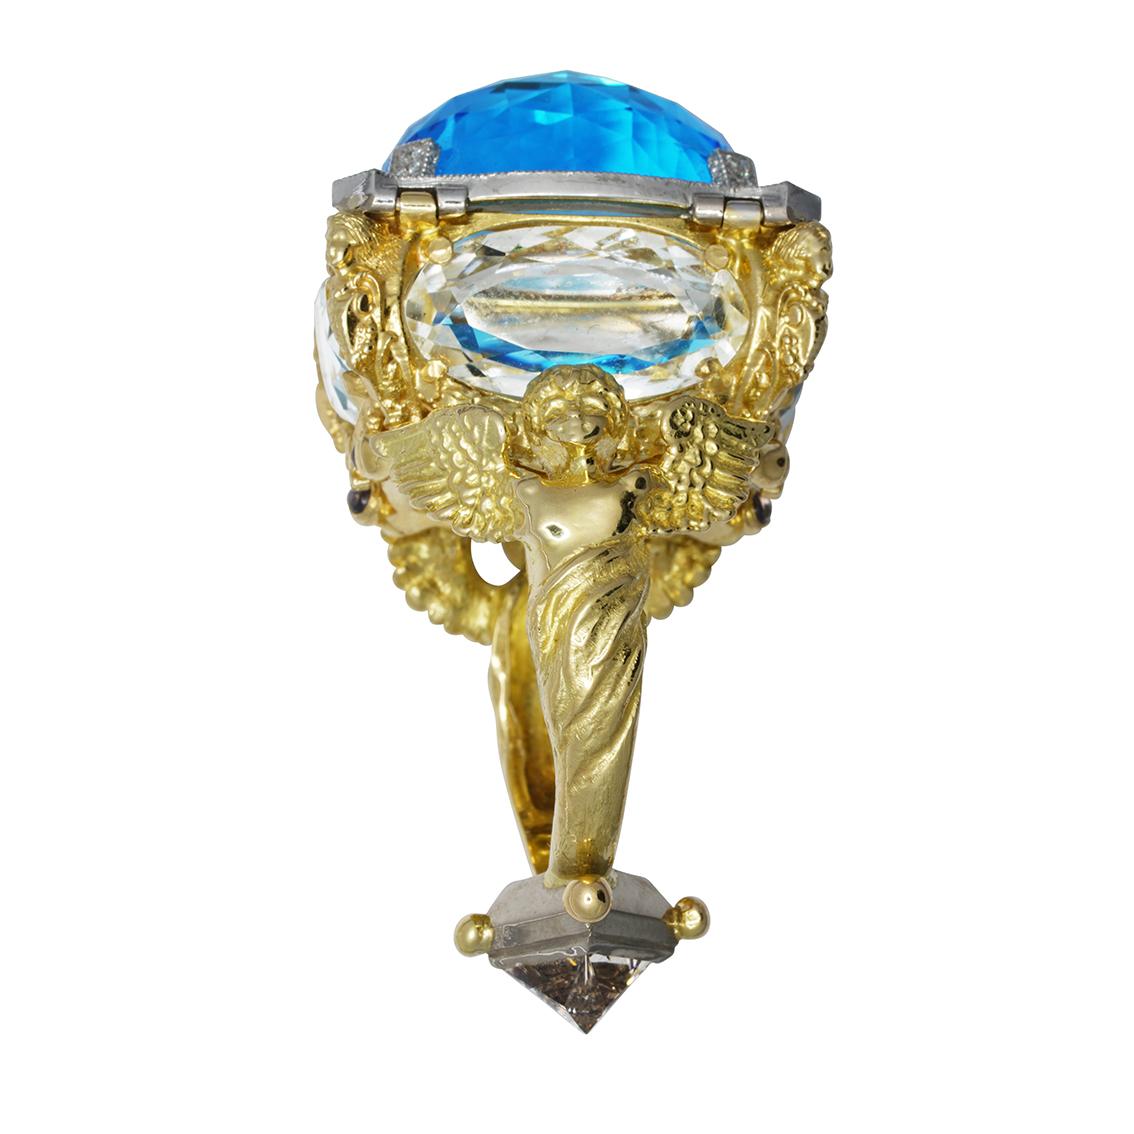 The Poseidon Ring is a huge 18ct yellow gold piece featuring a closing chamber build from a central vivid blue 23 carat topaz, and 4 white topaz which make up the other four windows. 

There is an additional hidden 1.5 carat princess cut diamond on